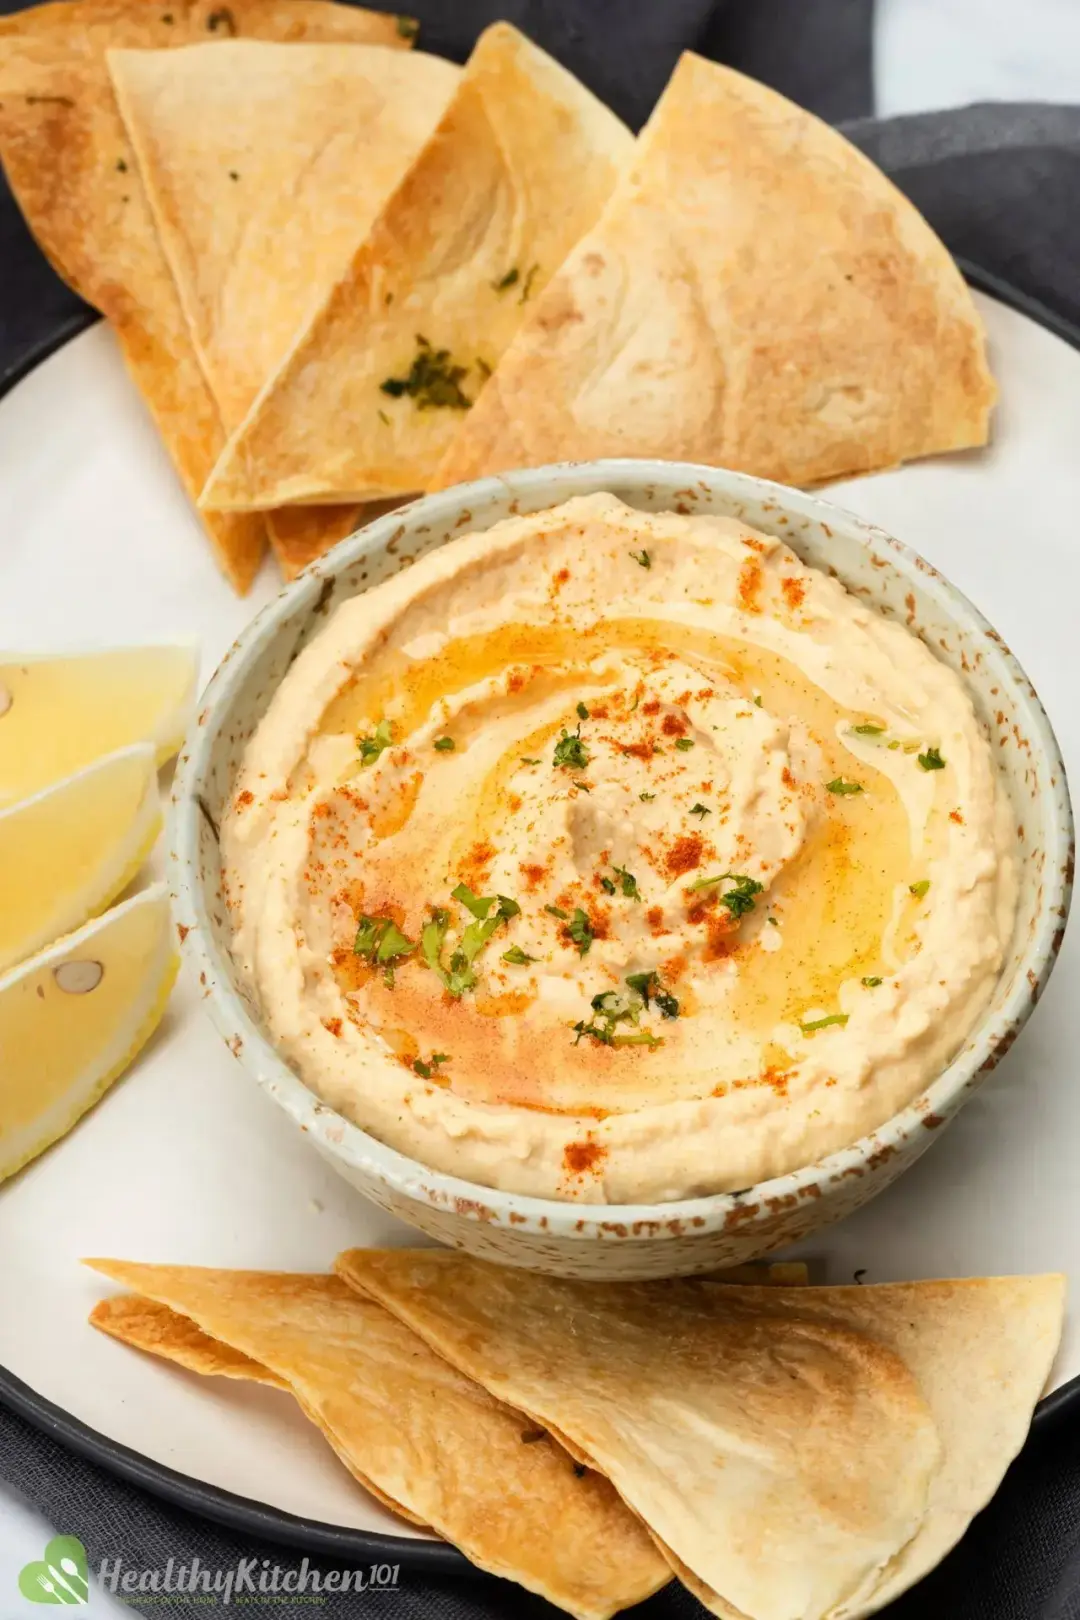 Hummus is it good or bad for you